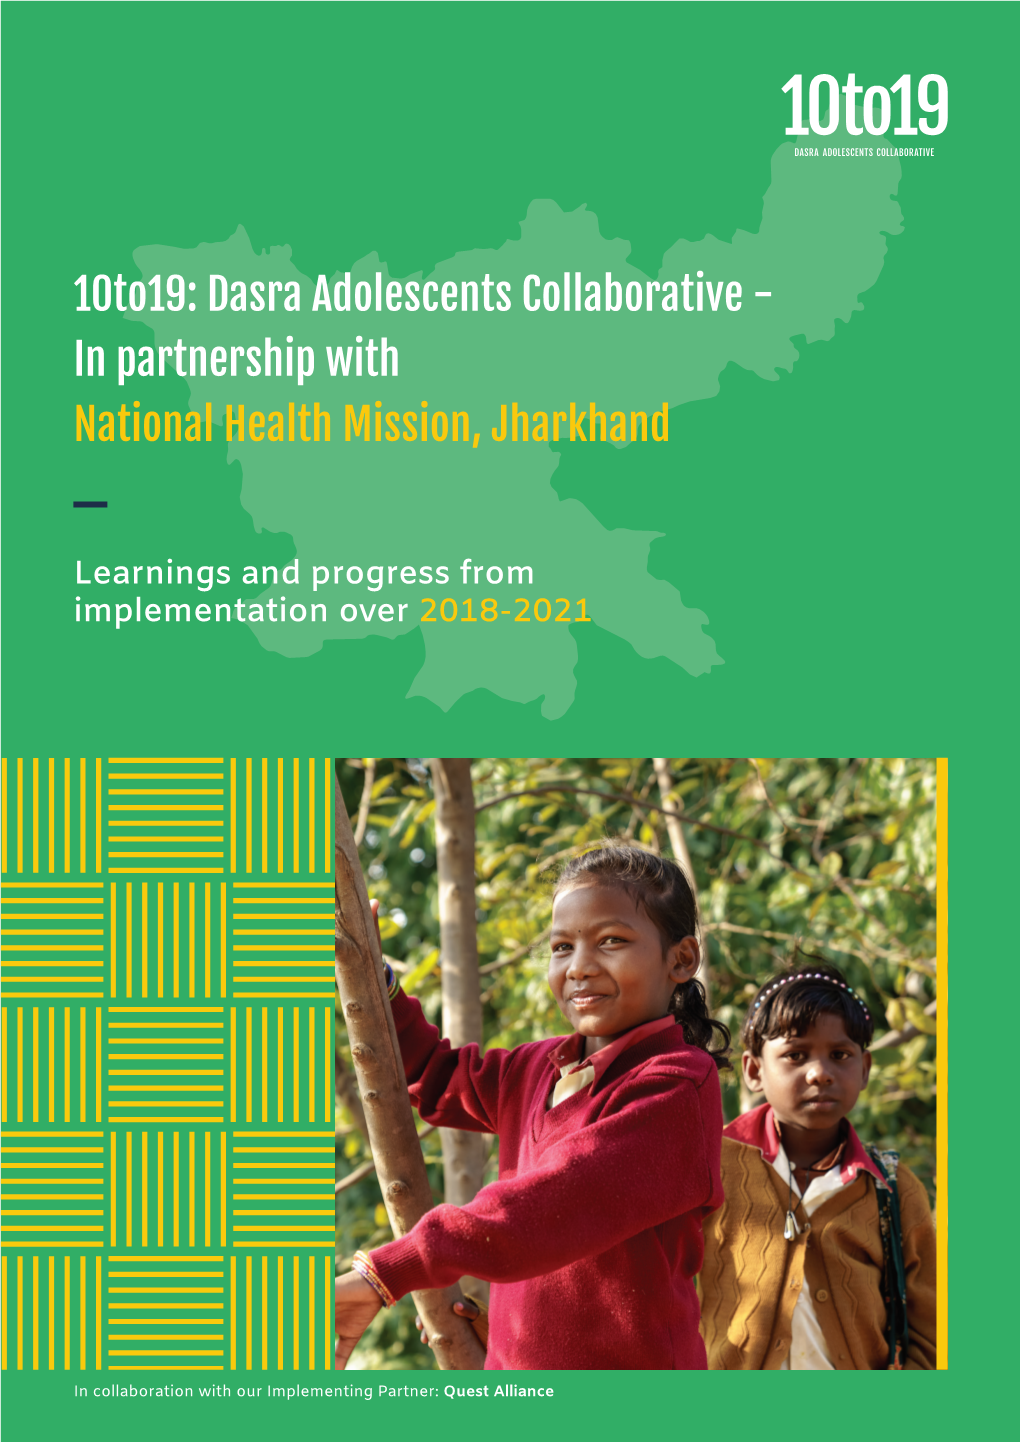 10To19: Dasra Adolescents Collaborative - in Partnership with National Health Mission, Jharkhand